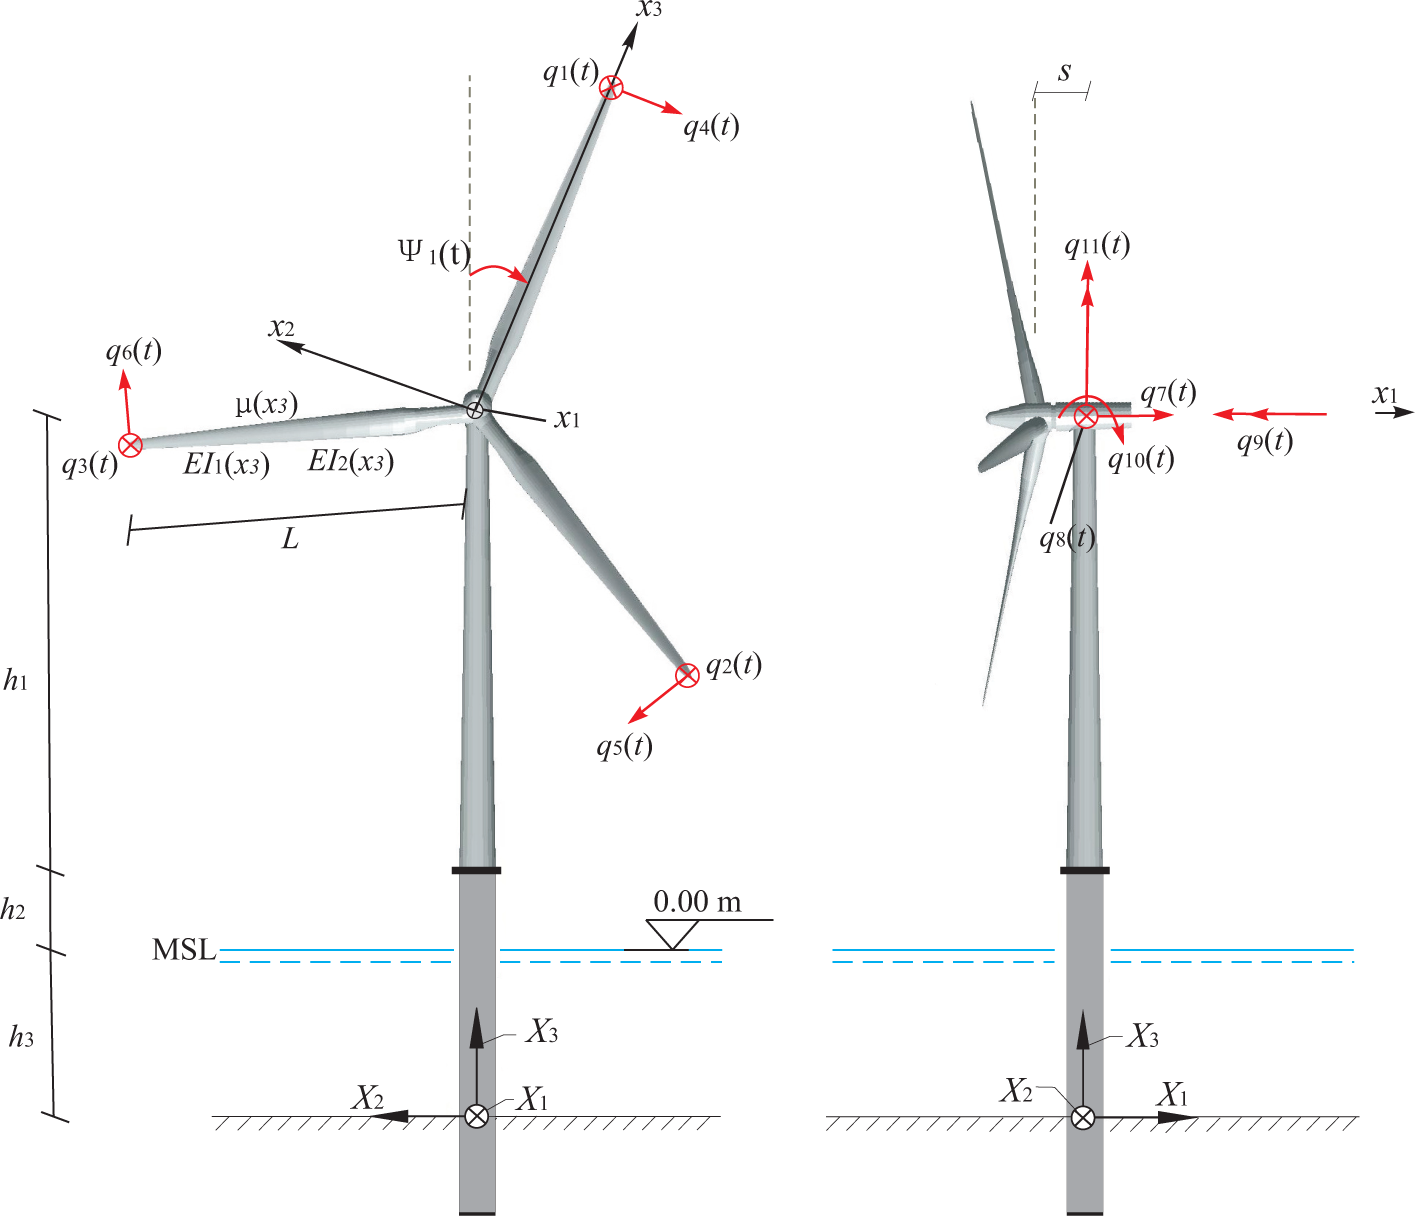 Energies | Free Full-Text | Dynamics and Control of Lateral Tower Vibrations  in Offshore Wind Turbines by Means of Active Generator Torque